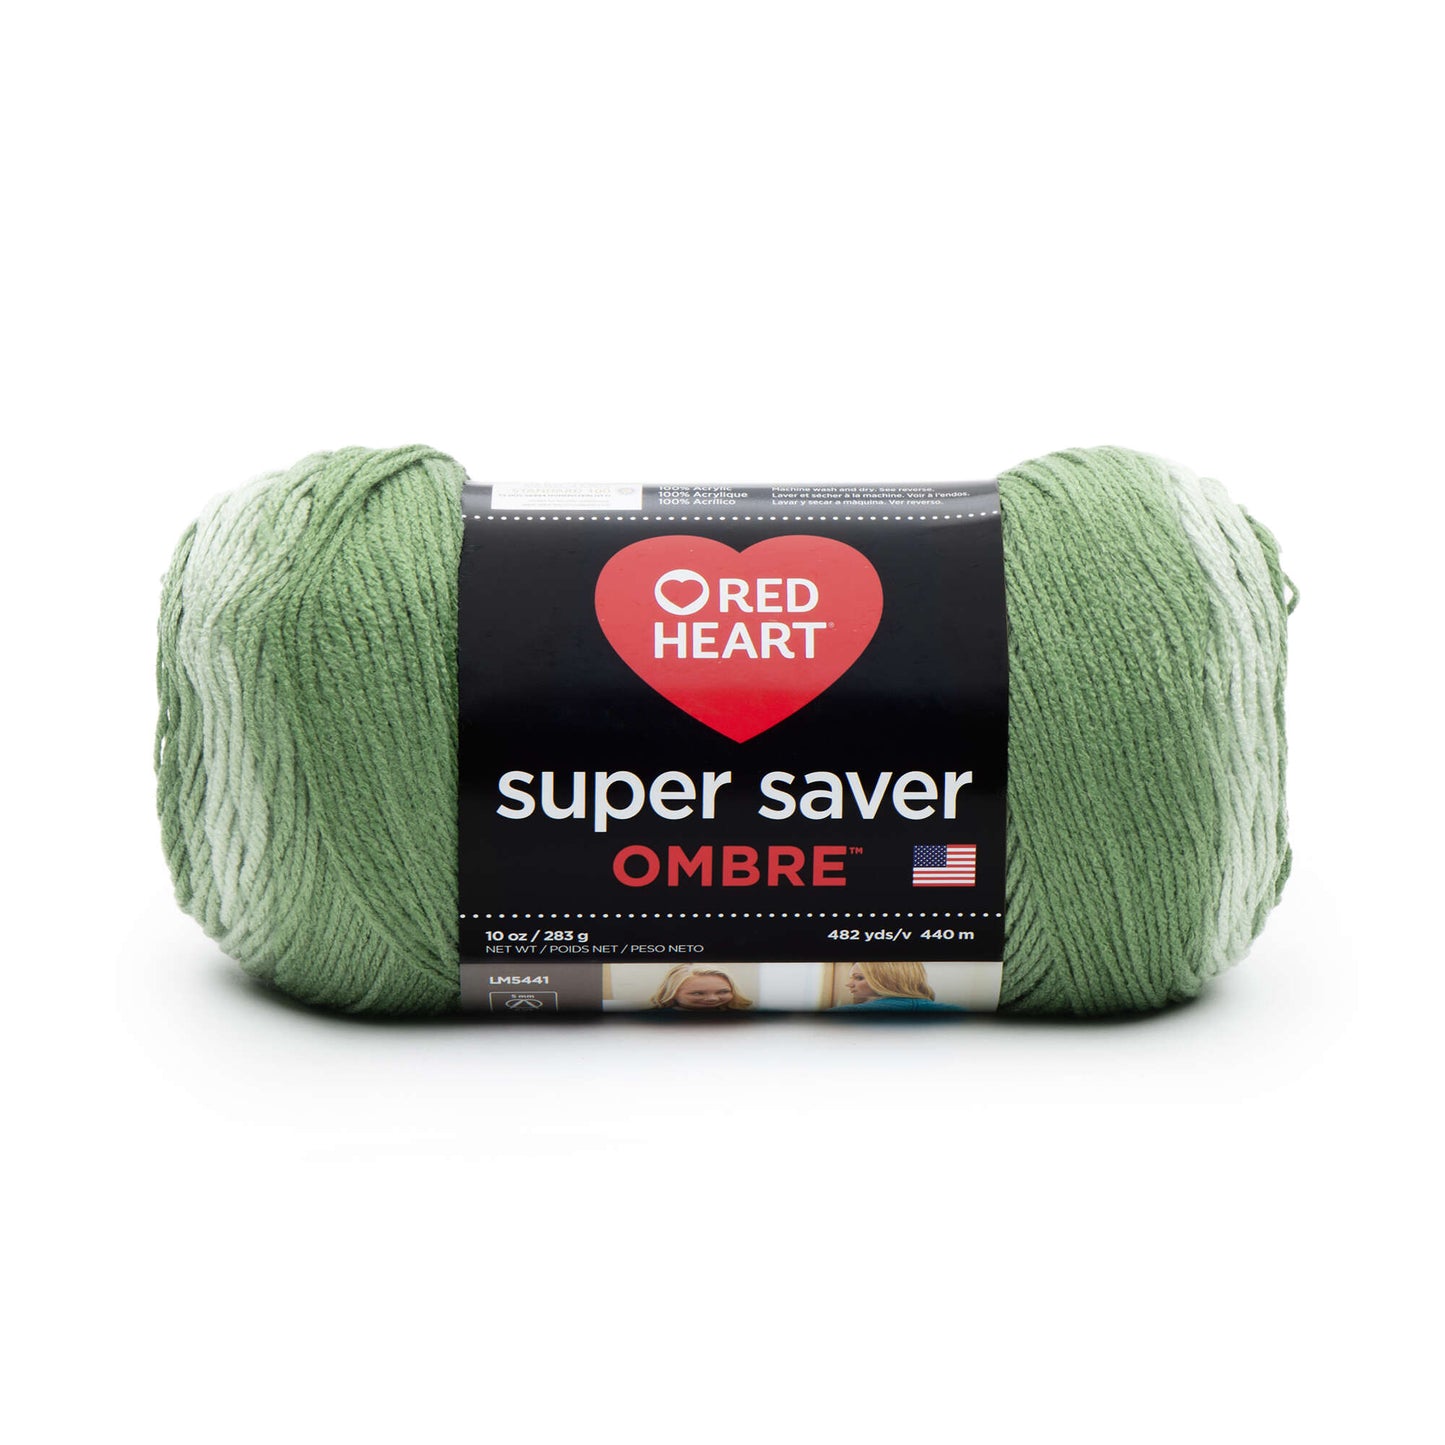 Red Heart Super Saver Ombre Yarn - 482 Yards